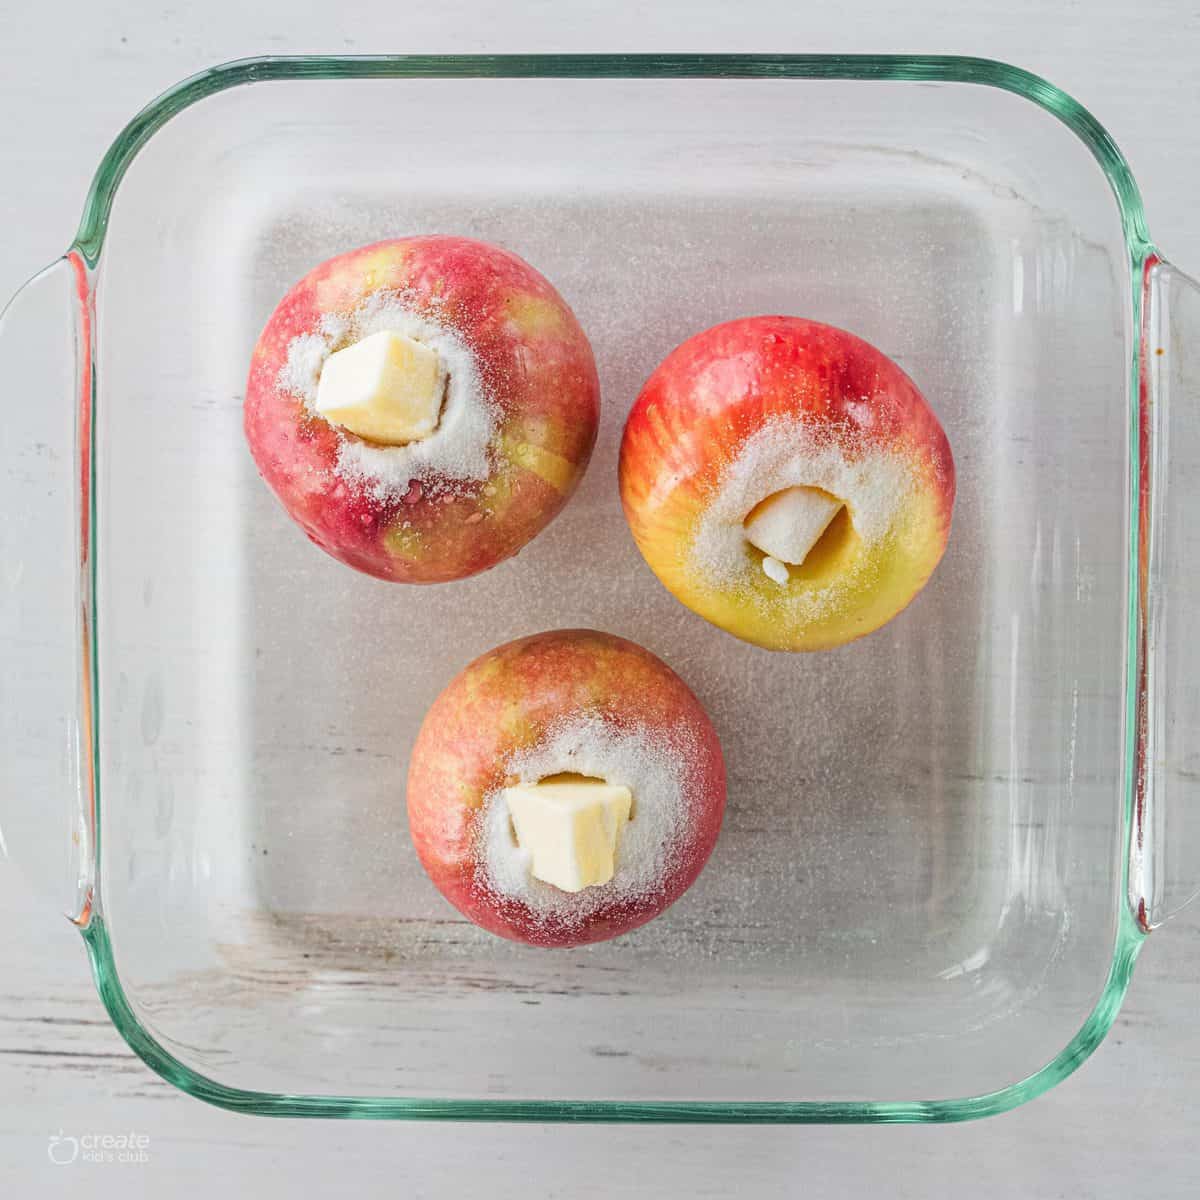 cored apples in baked dish with butter in center